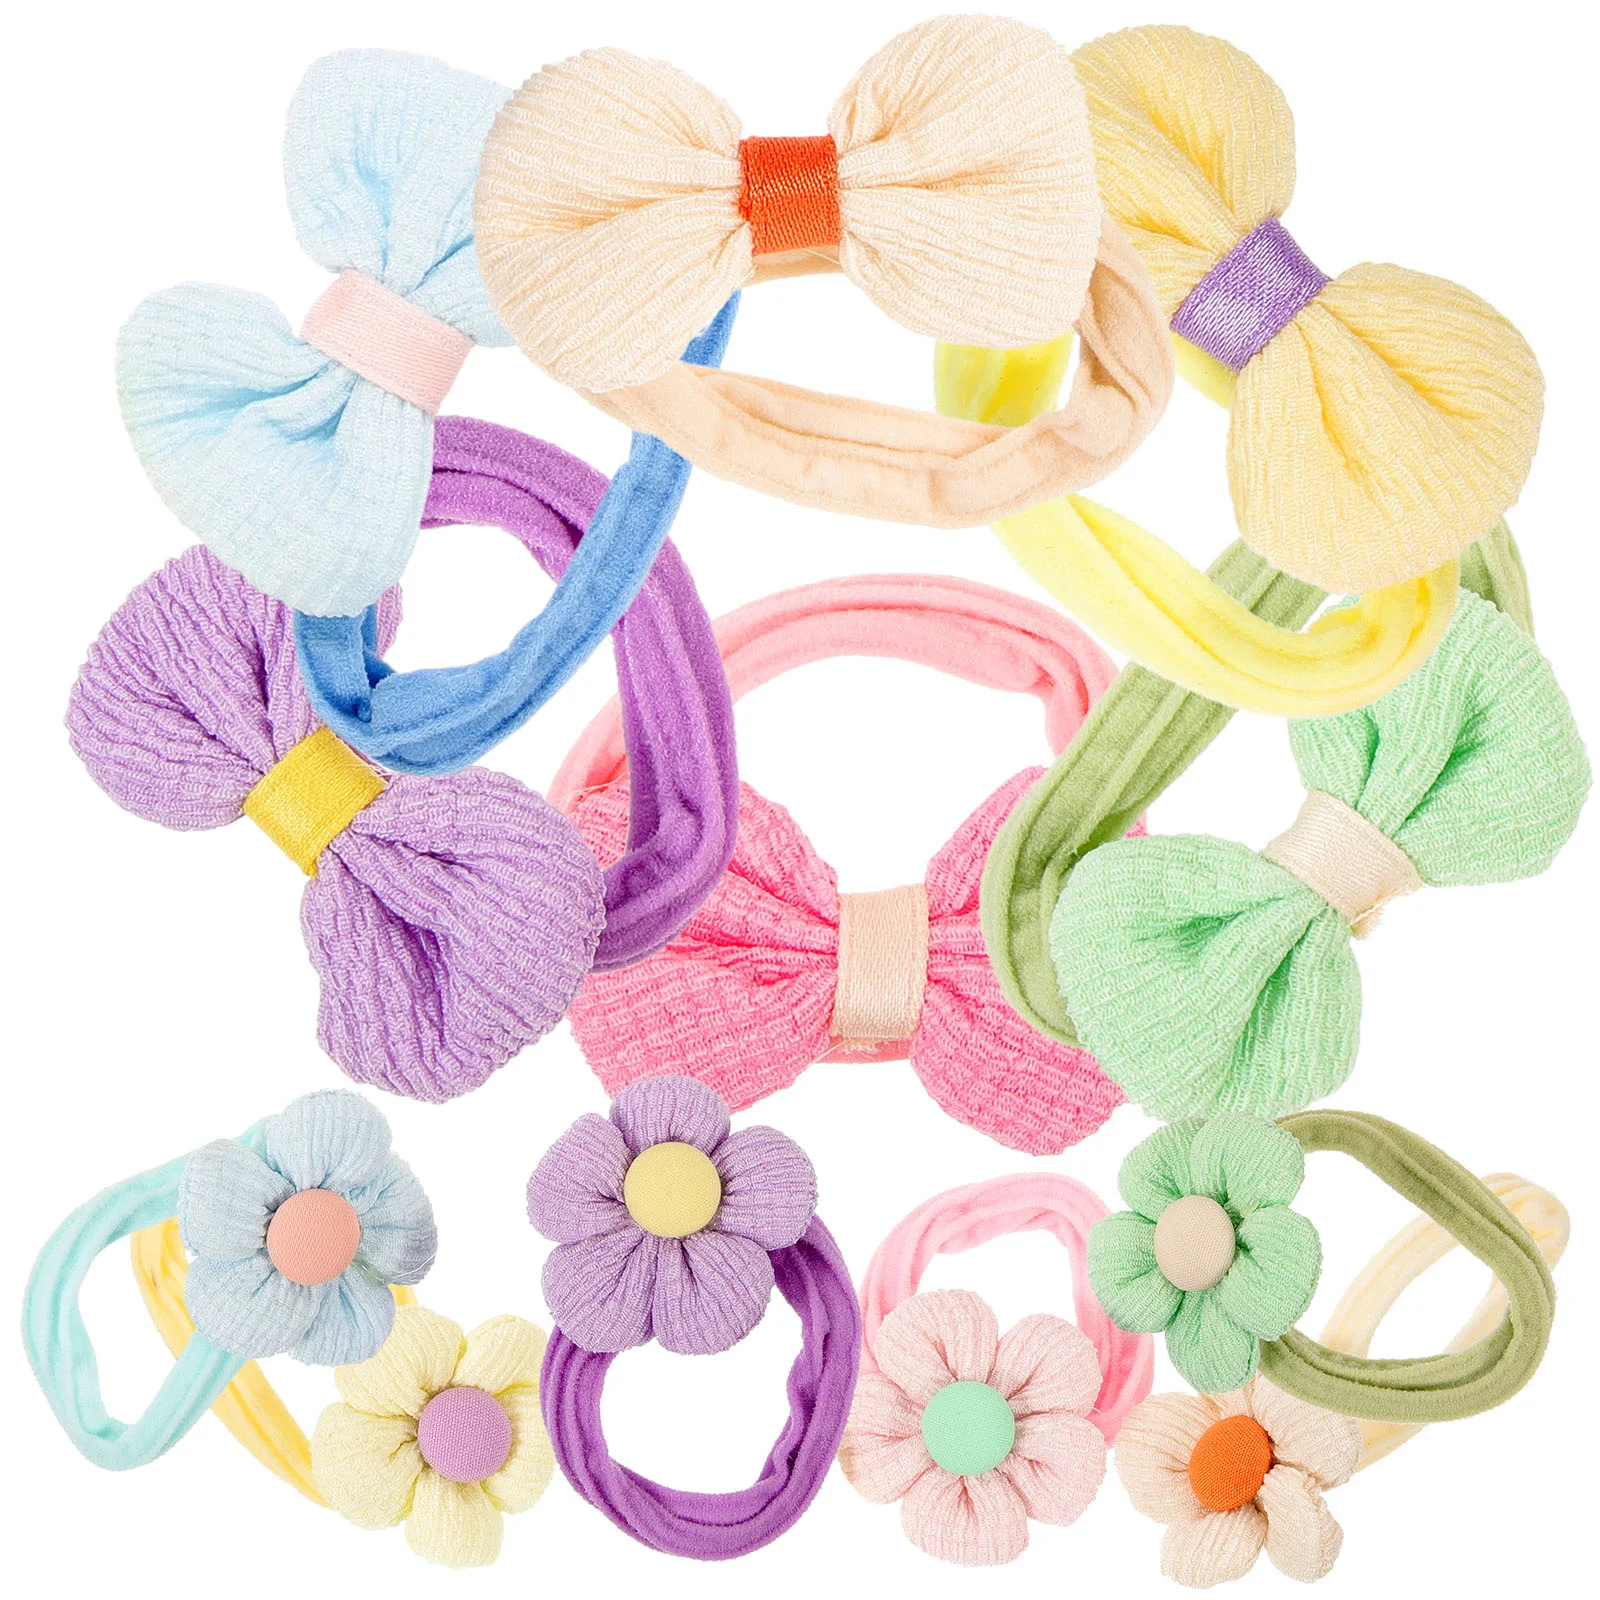 

12 Pcs Baby Hair Bands Ties Girls Scrunchies Elastics Toddler Soft Toddlers Fabric Child Ponytail Holders Fine